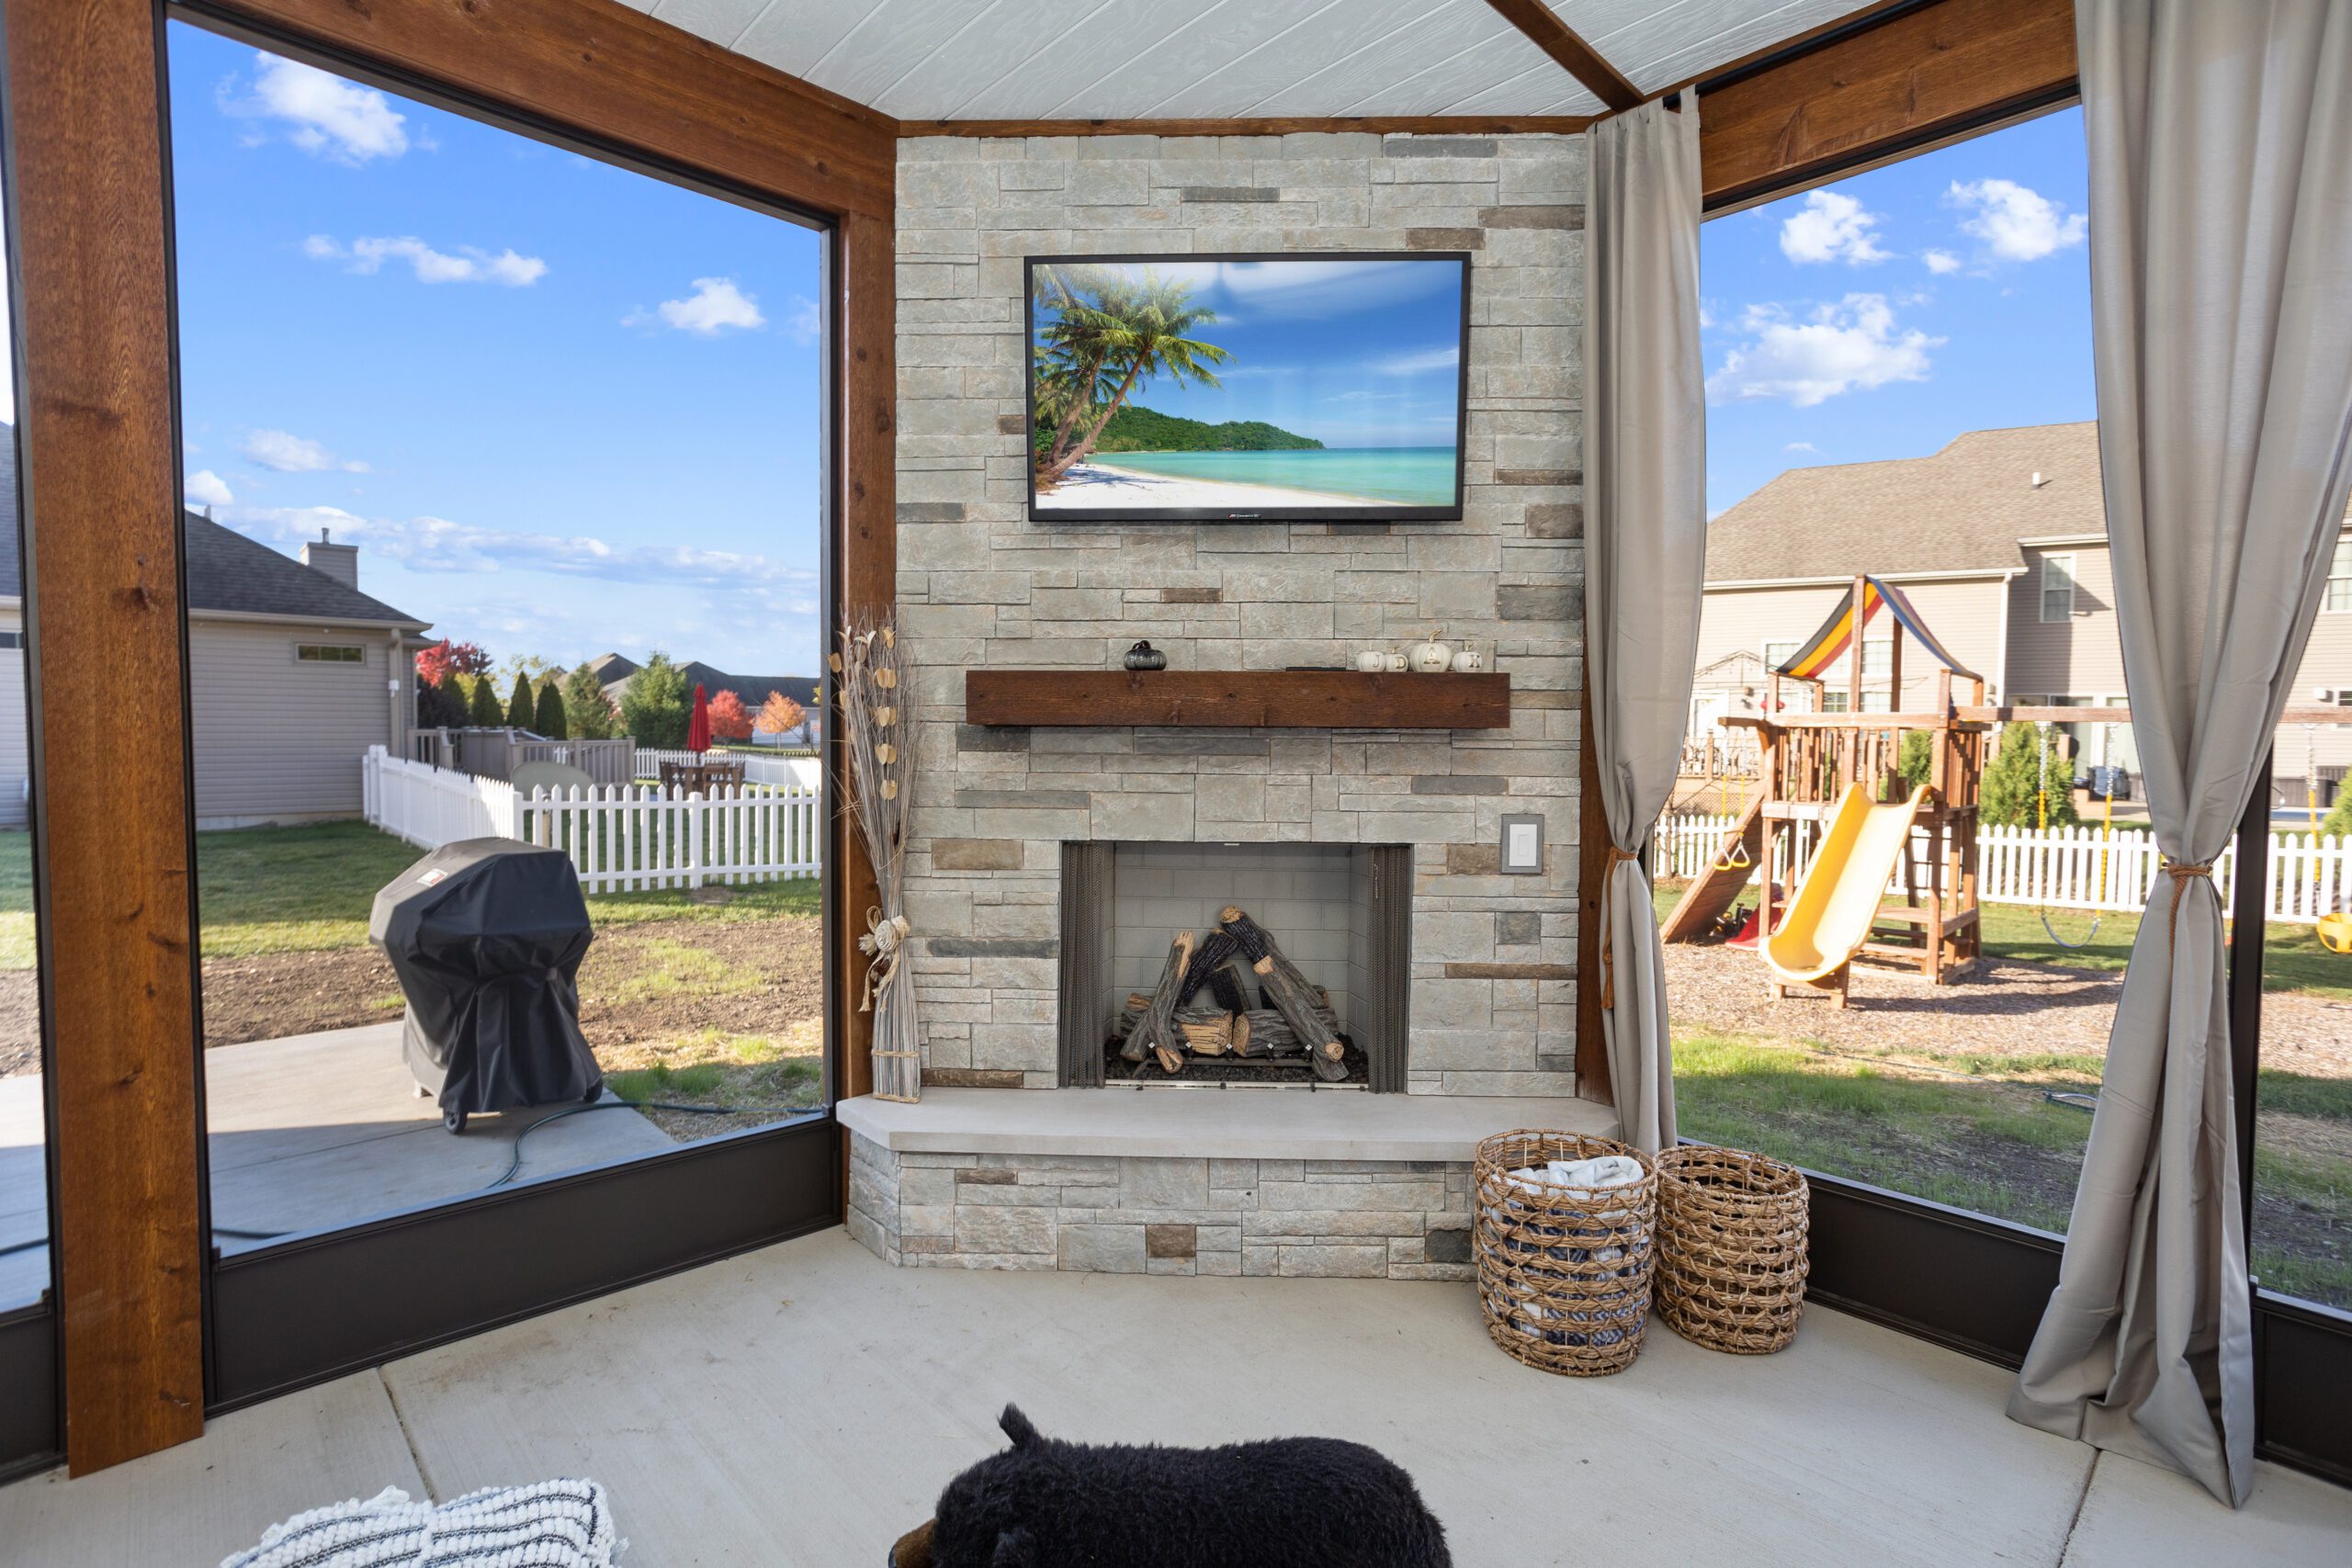 coors remodeling installs sunrooms with tvs